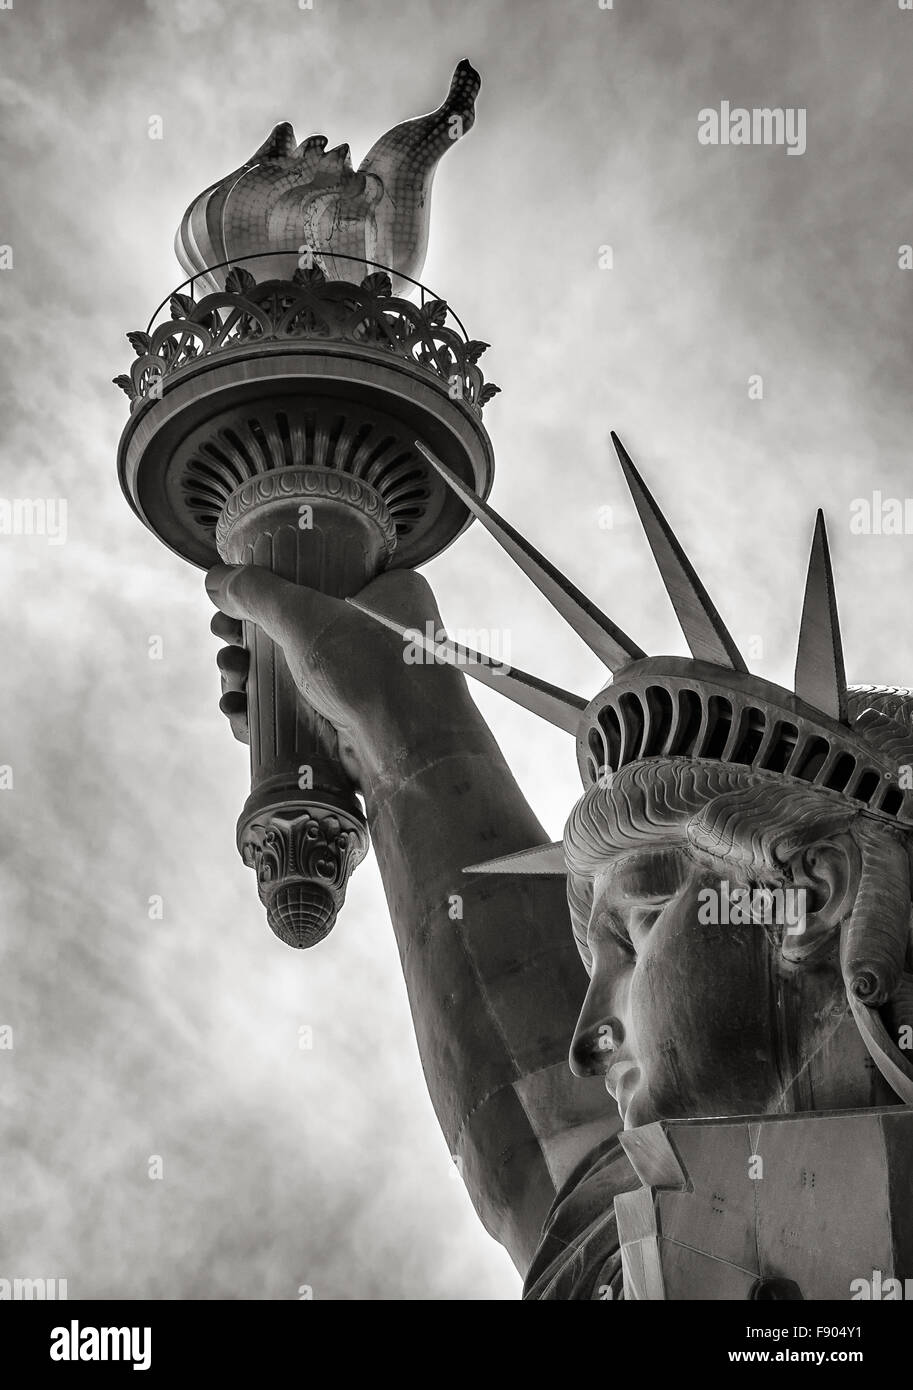 Black & White detail of torch, crown and profile of the Statue of Liberty, Liberty Island, New York City Stock Photo